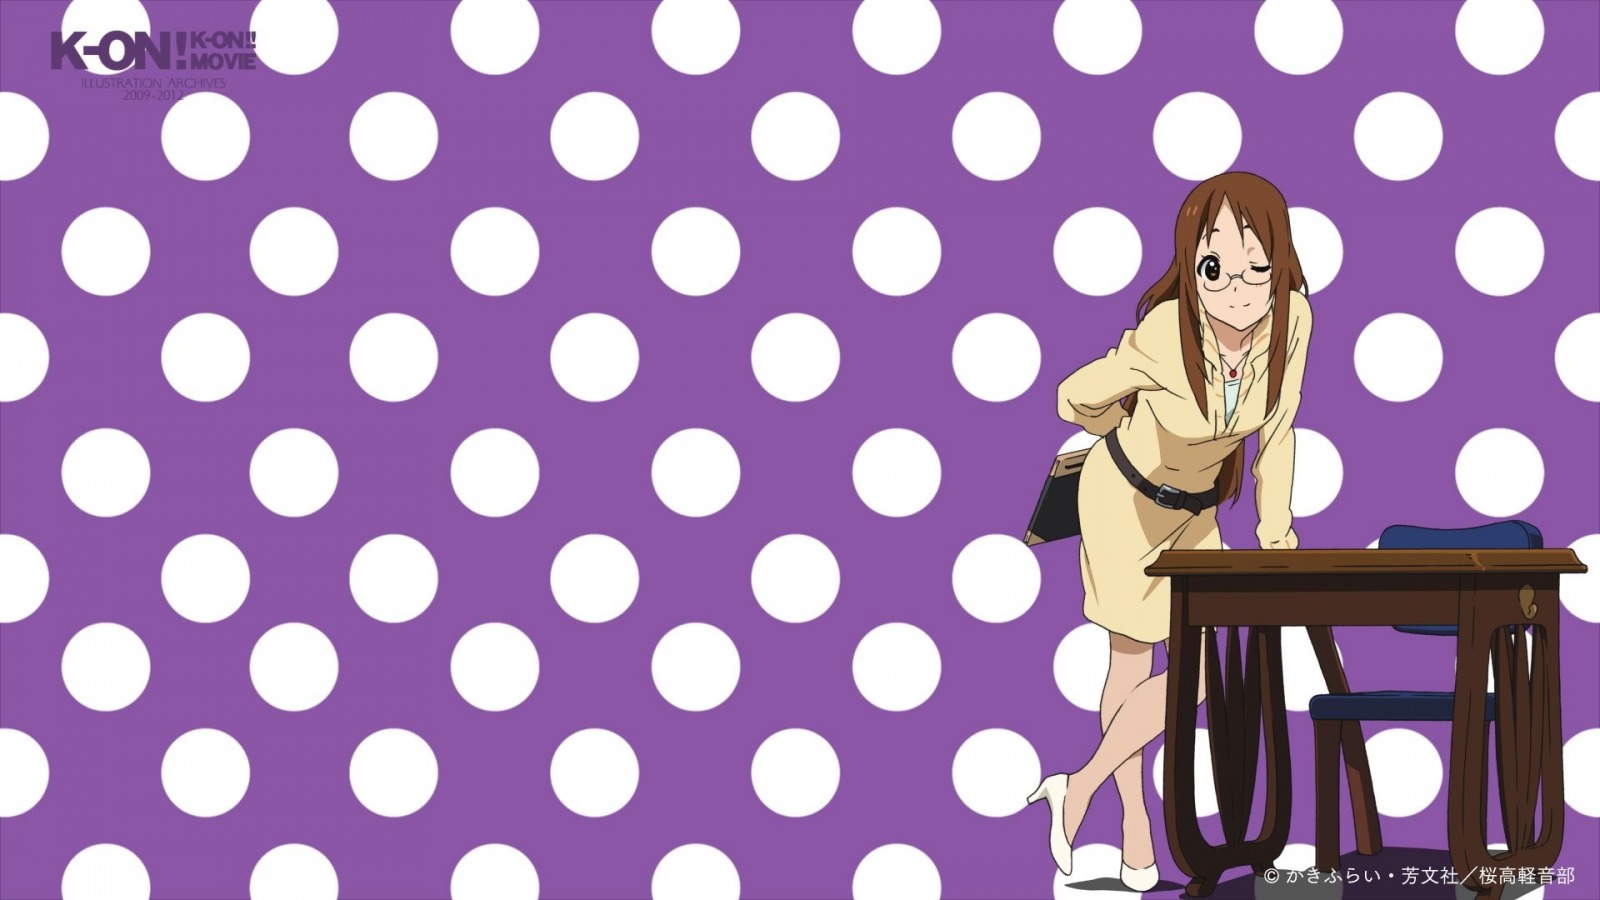 K-ON! IILUSTRATION ARCHIEVES 2009-2012 P.2 [P3]